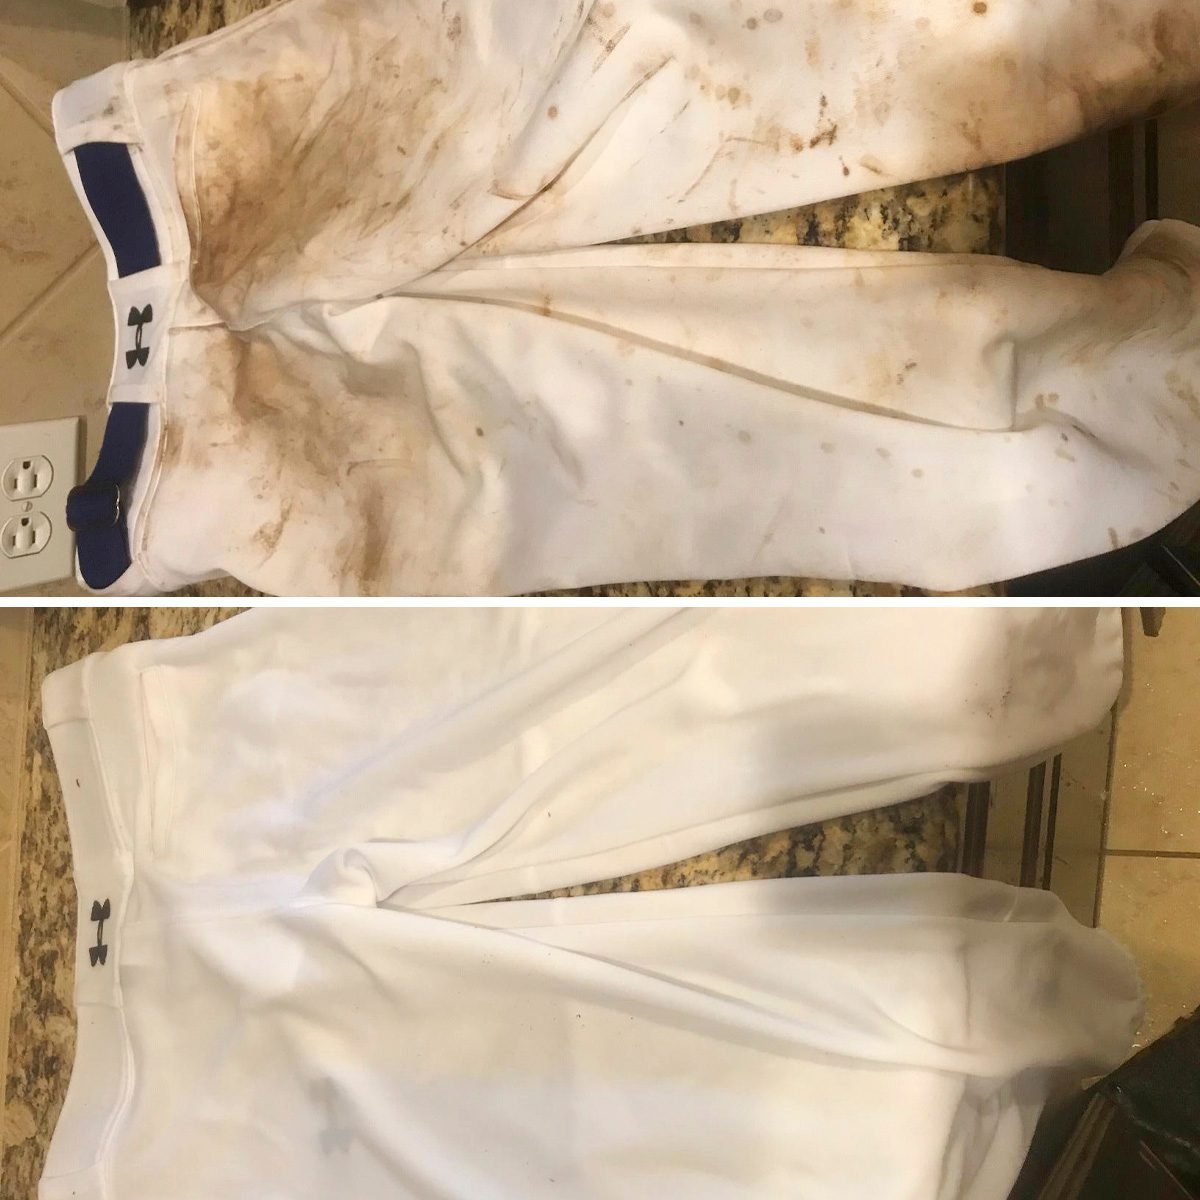 Before and After Dirty Laundry Photos [2022]